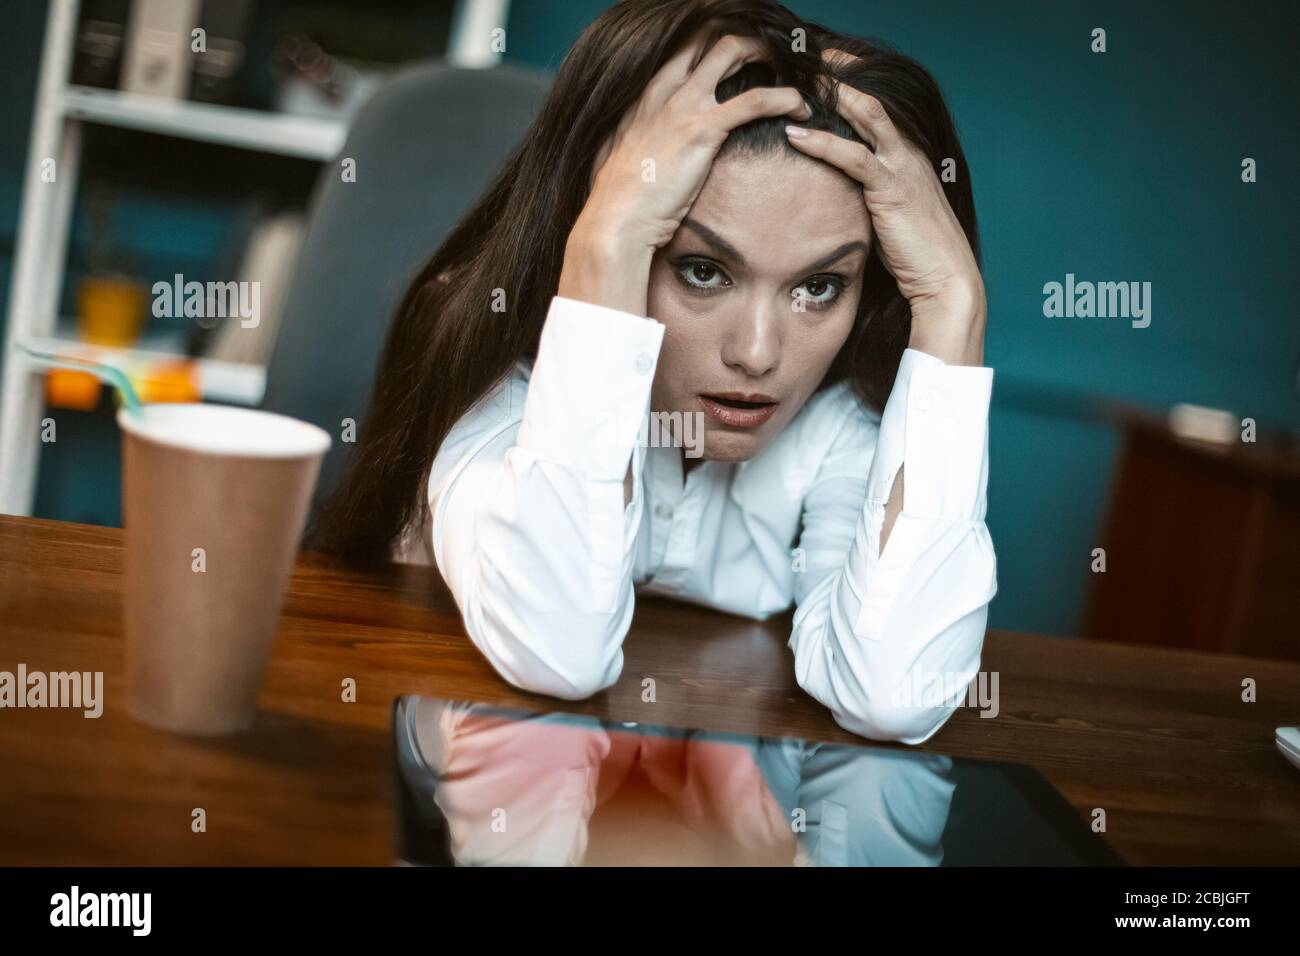 Stressed business woman feels emotional stress. Bored or crazy woman falling into stupor with coffee cup at workplace. Crisis concept. Tinted image Stock Photo